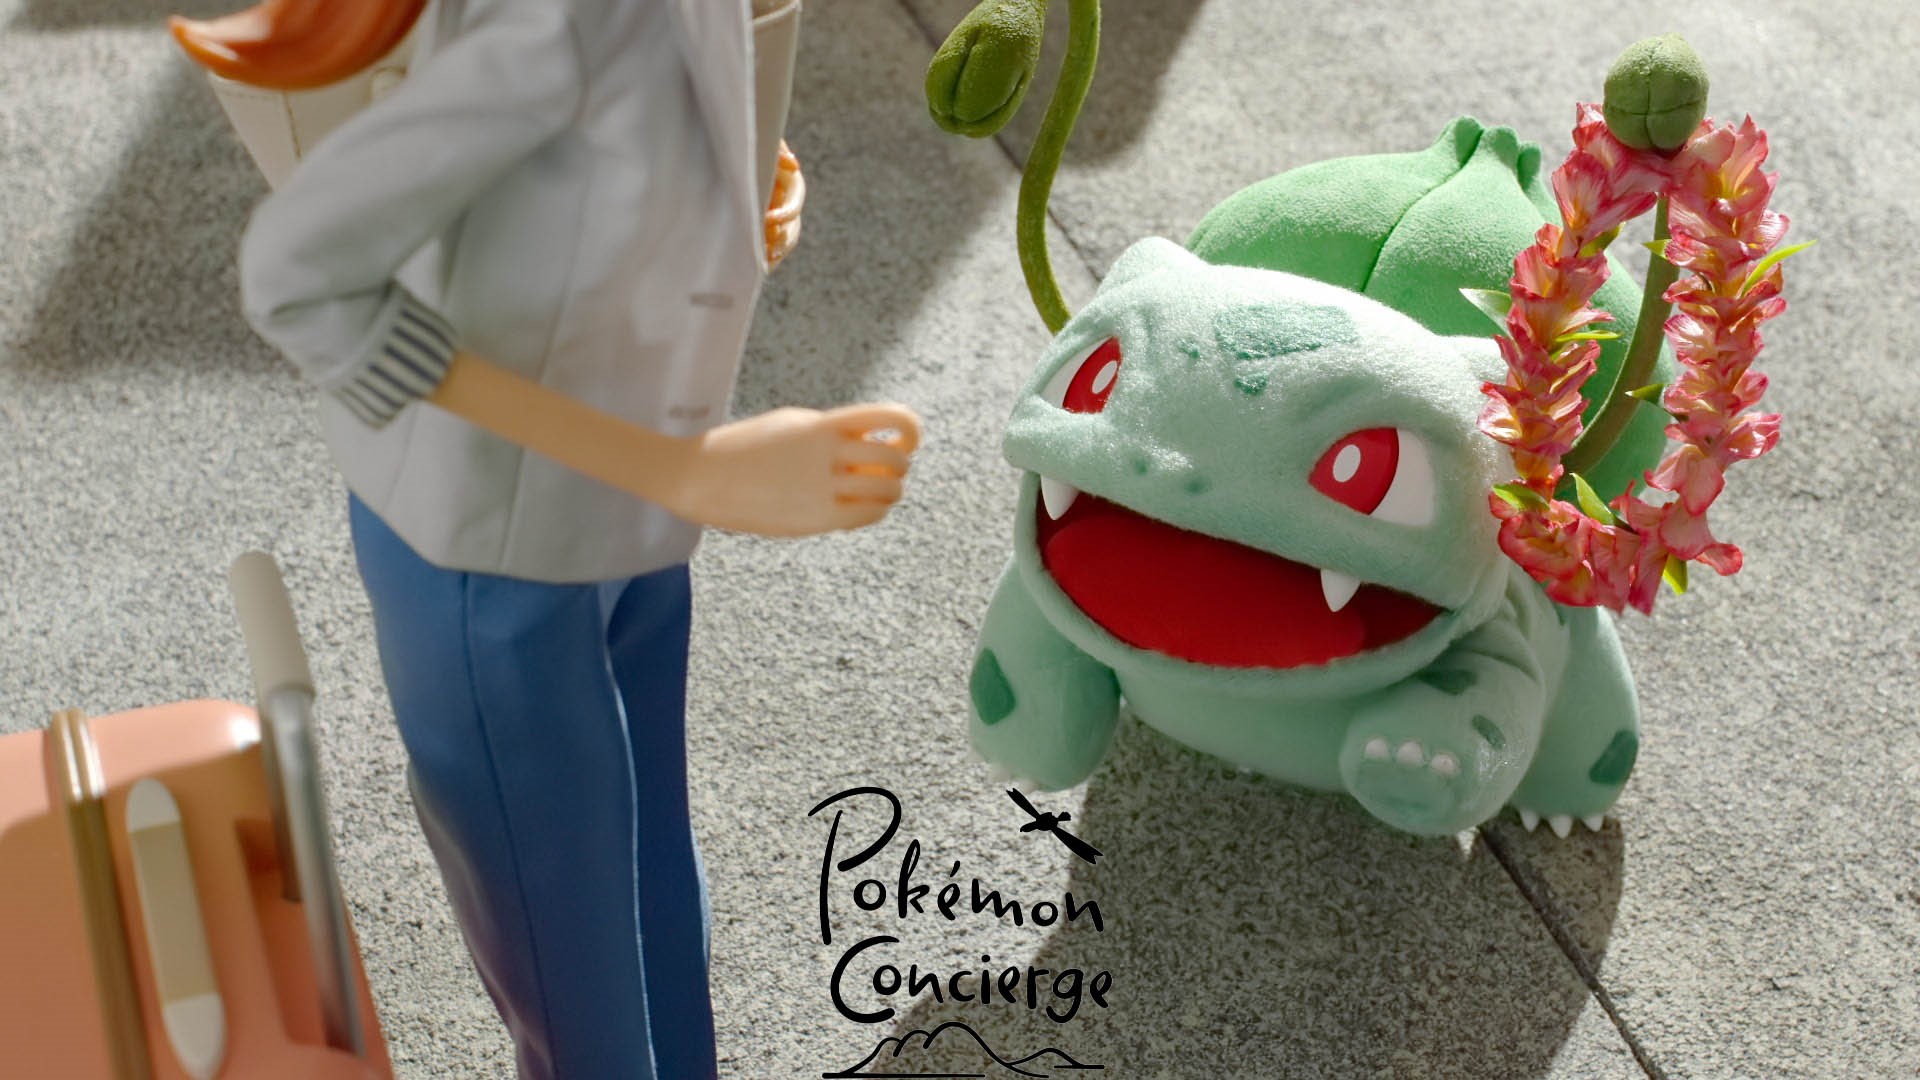 POKÉMON CONCIERGE – Discover a Relaxing and Invigorating Pokémon Resort Experience in New Stills of the Upcoming Netflix